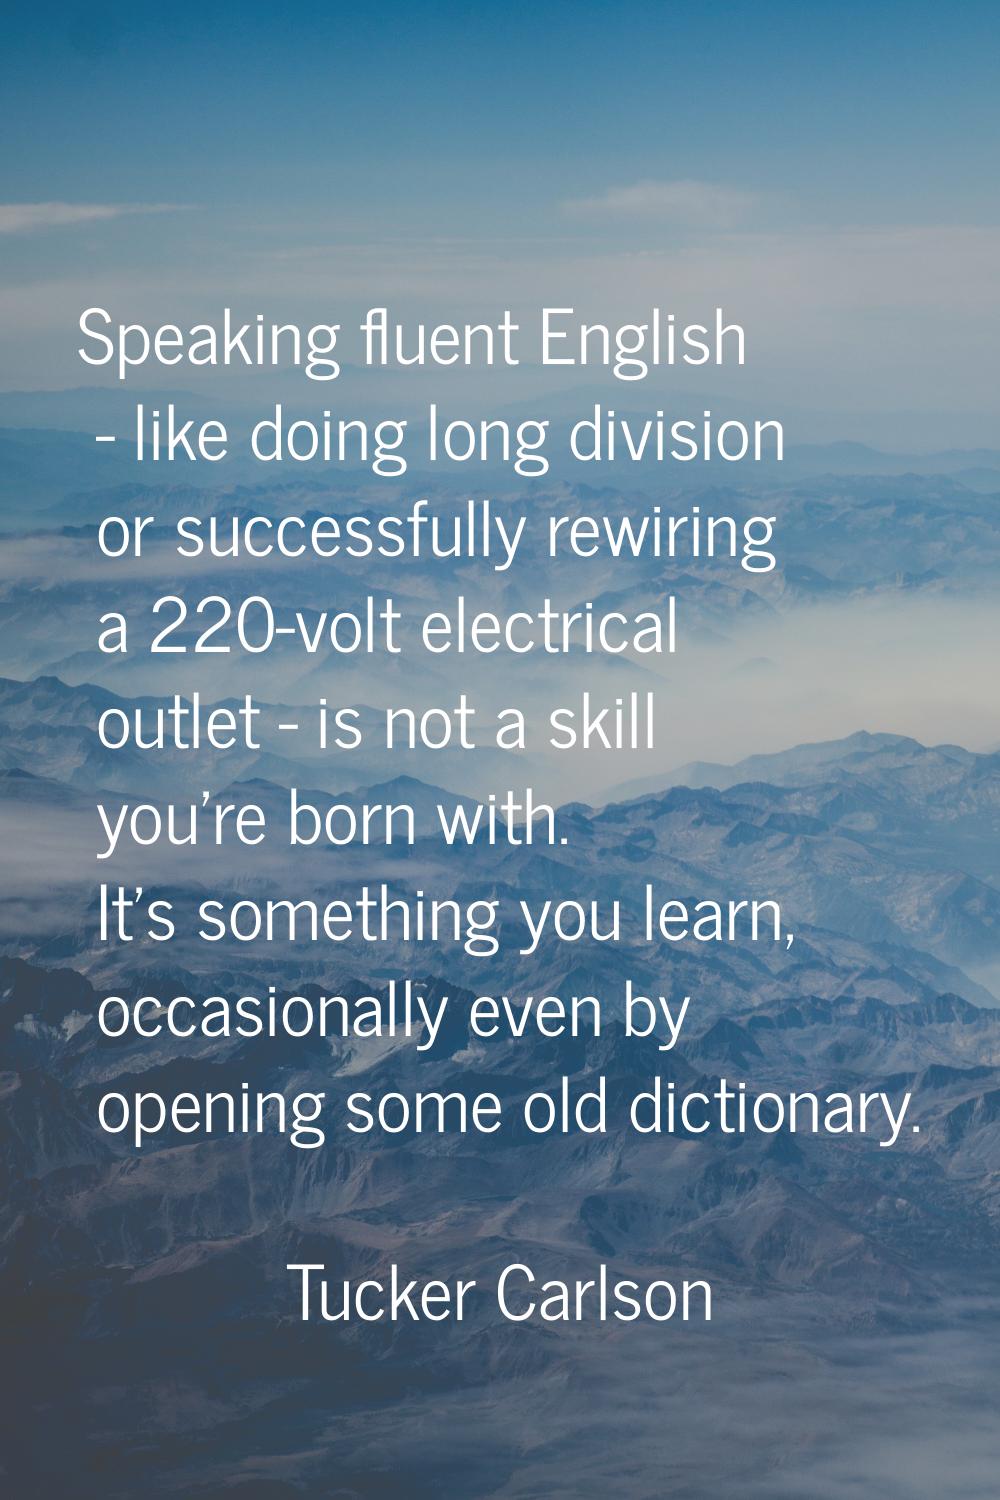 Speaking fluent English - like doing long division or successfully rewiring a 220-volt electrical o